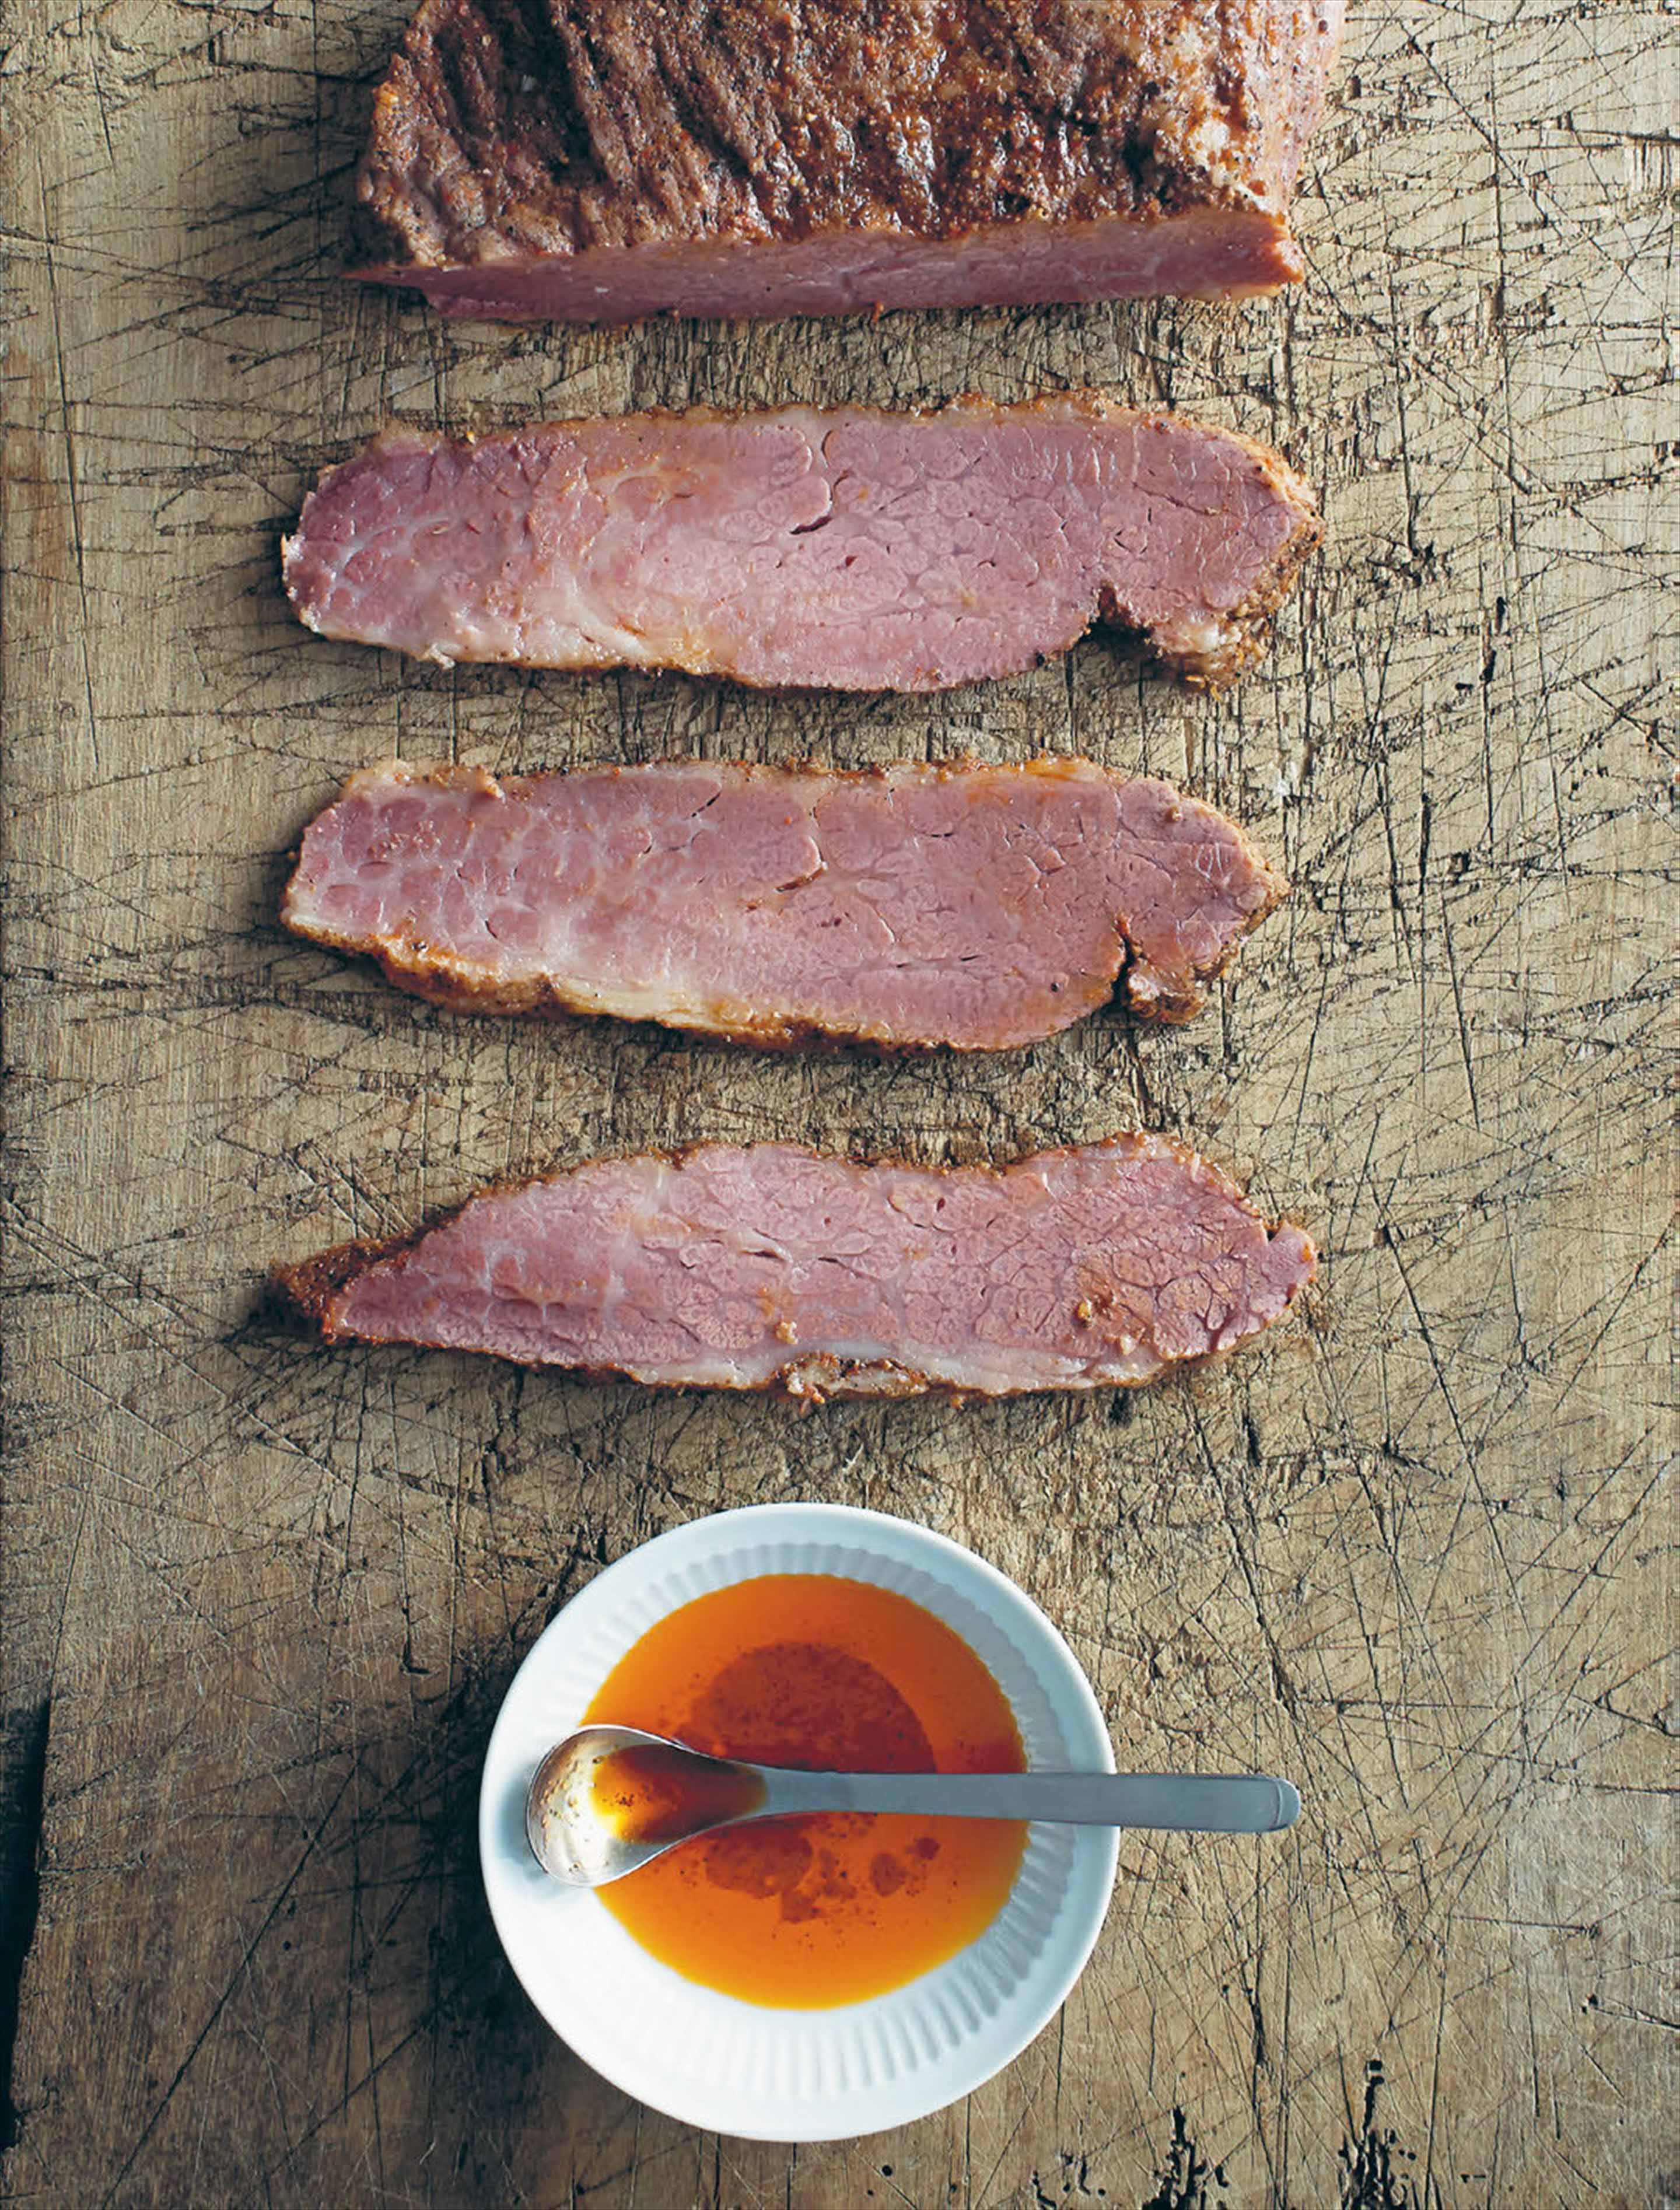 Spicy pastrami with chilli oil dressing